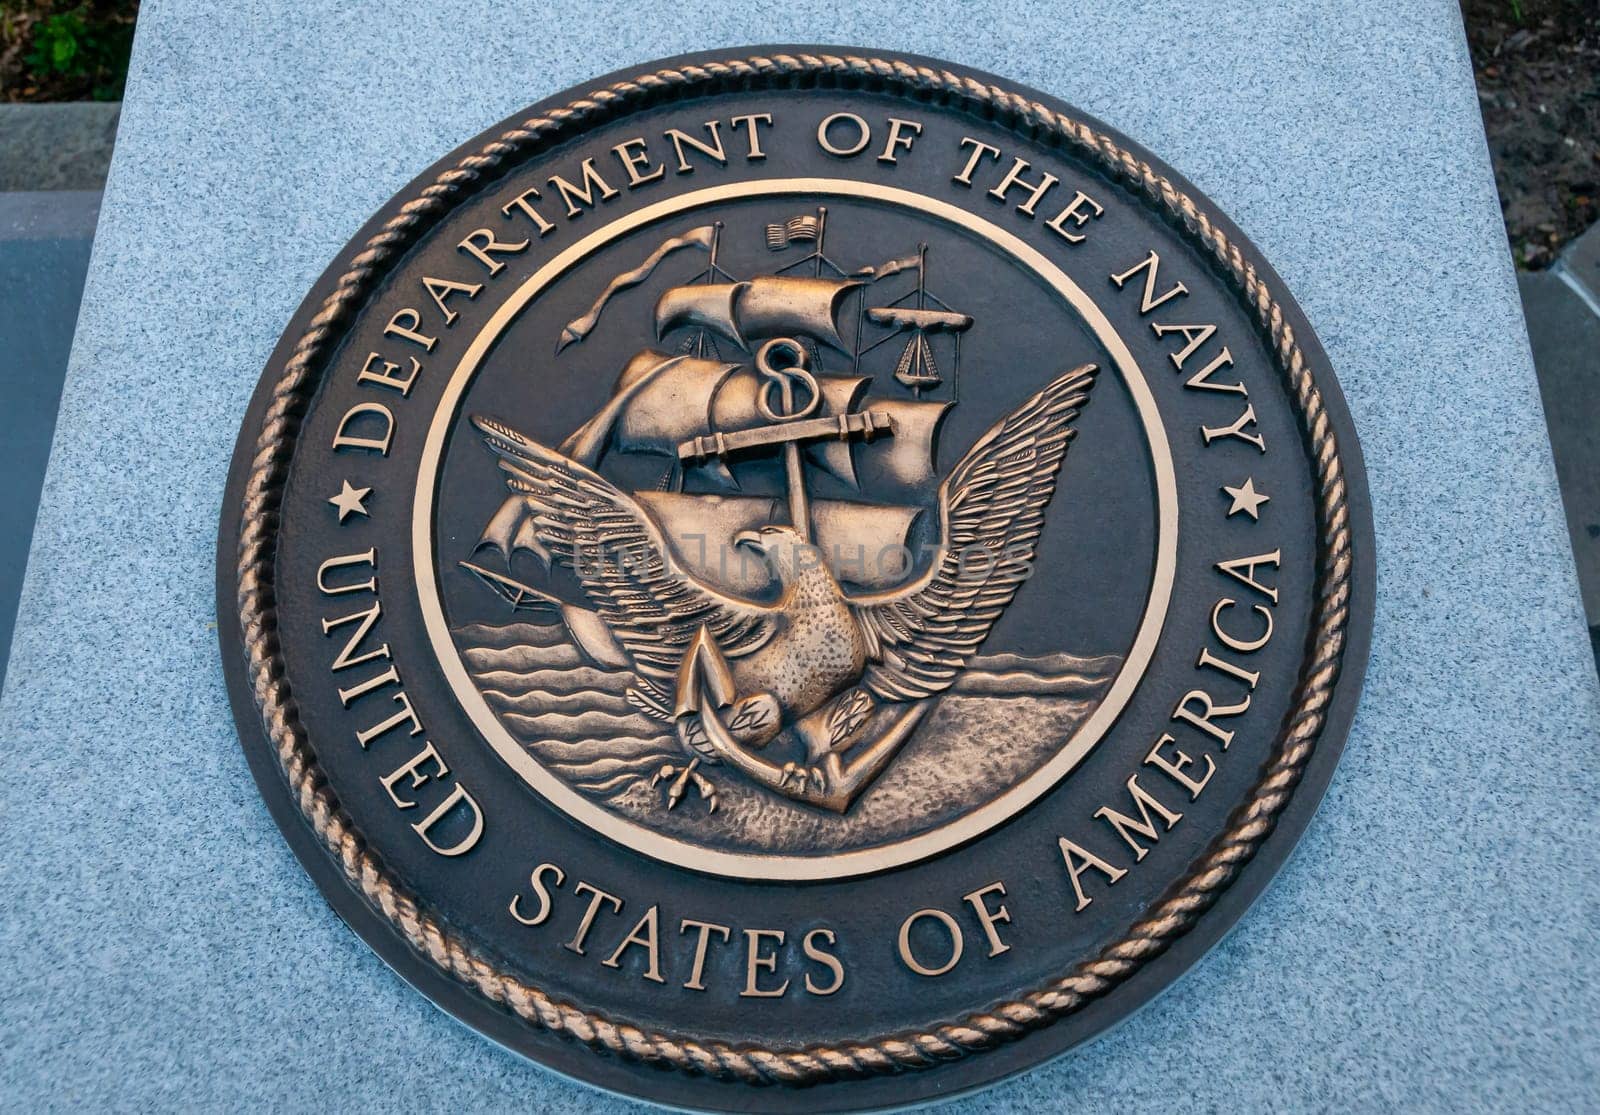 Department of the Army logo on the monument in the city of Savannah by Hydrobiolog